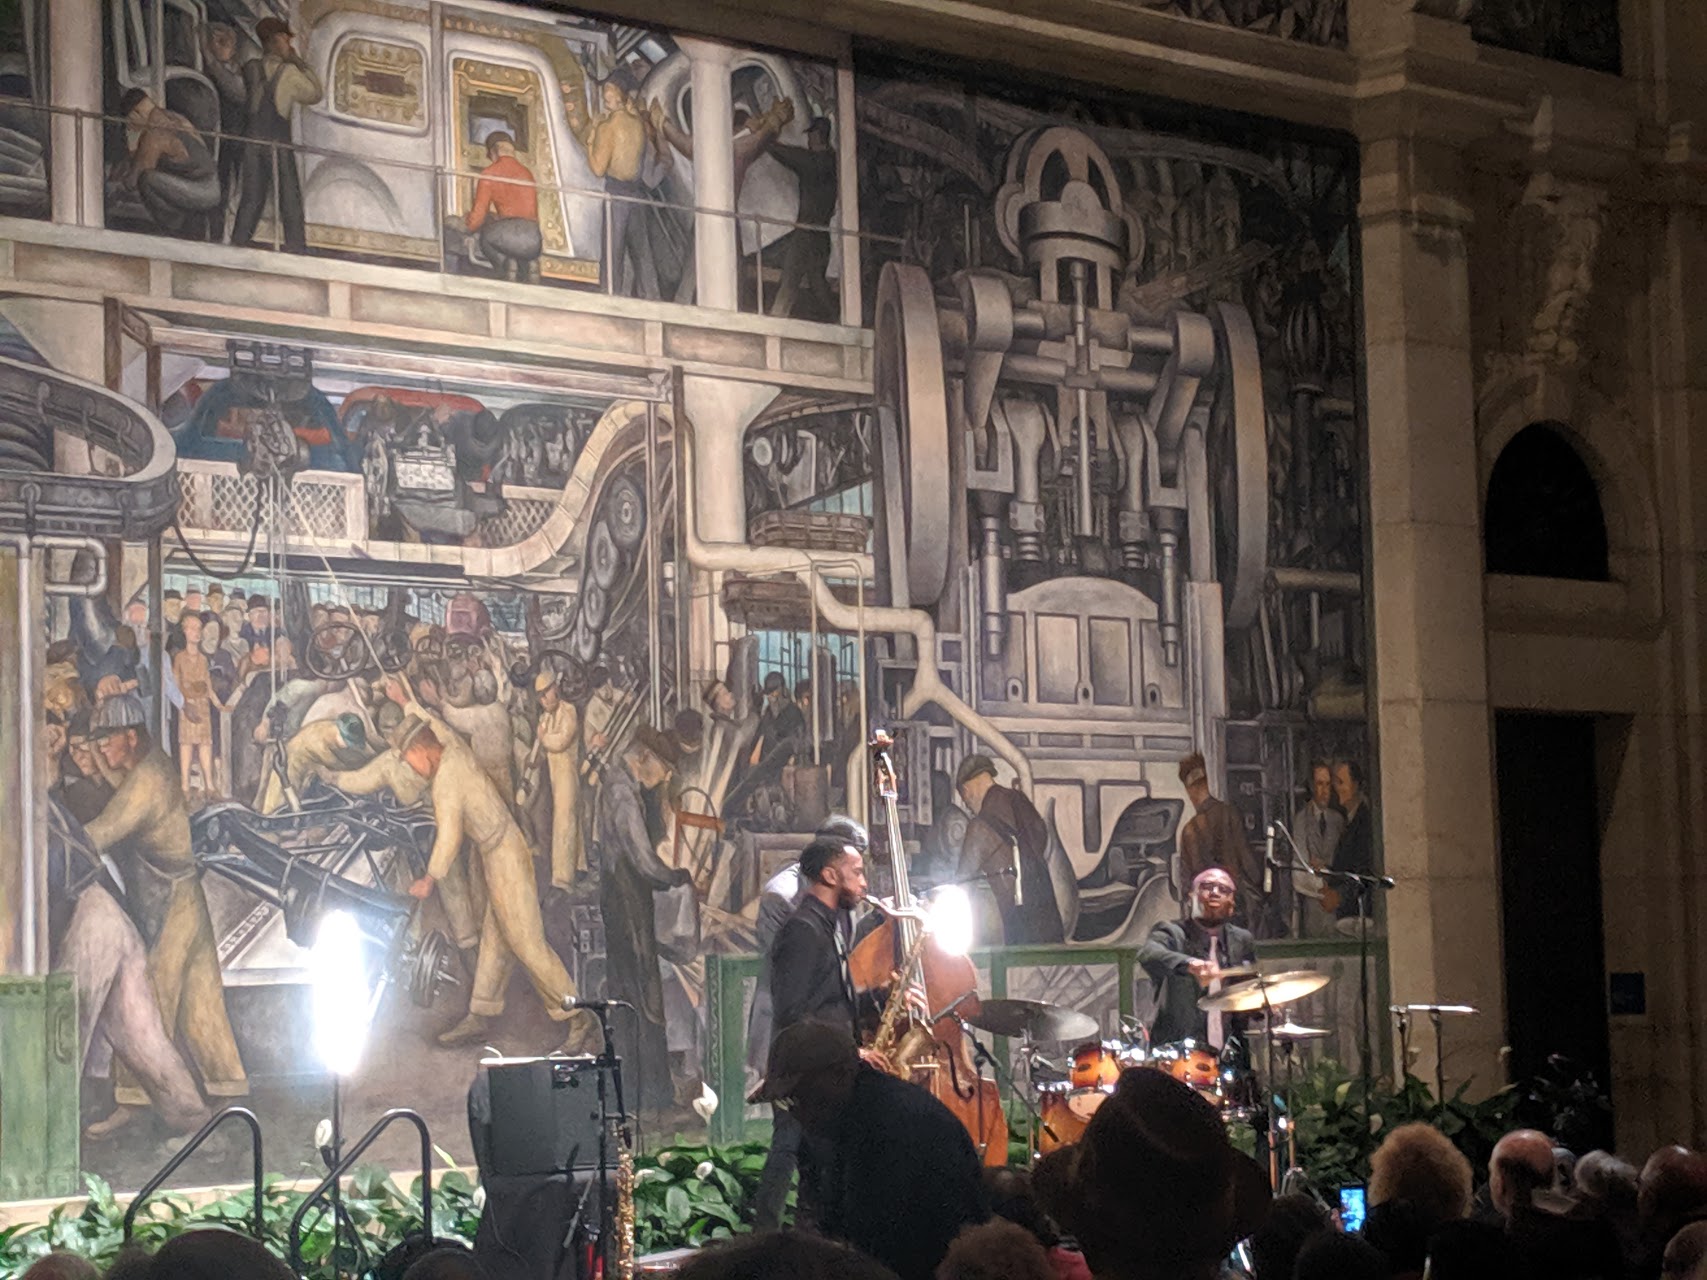 The Marcus Elliot Trio Brought One Of The Liveliest Events To The DIA